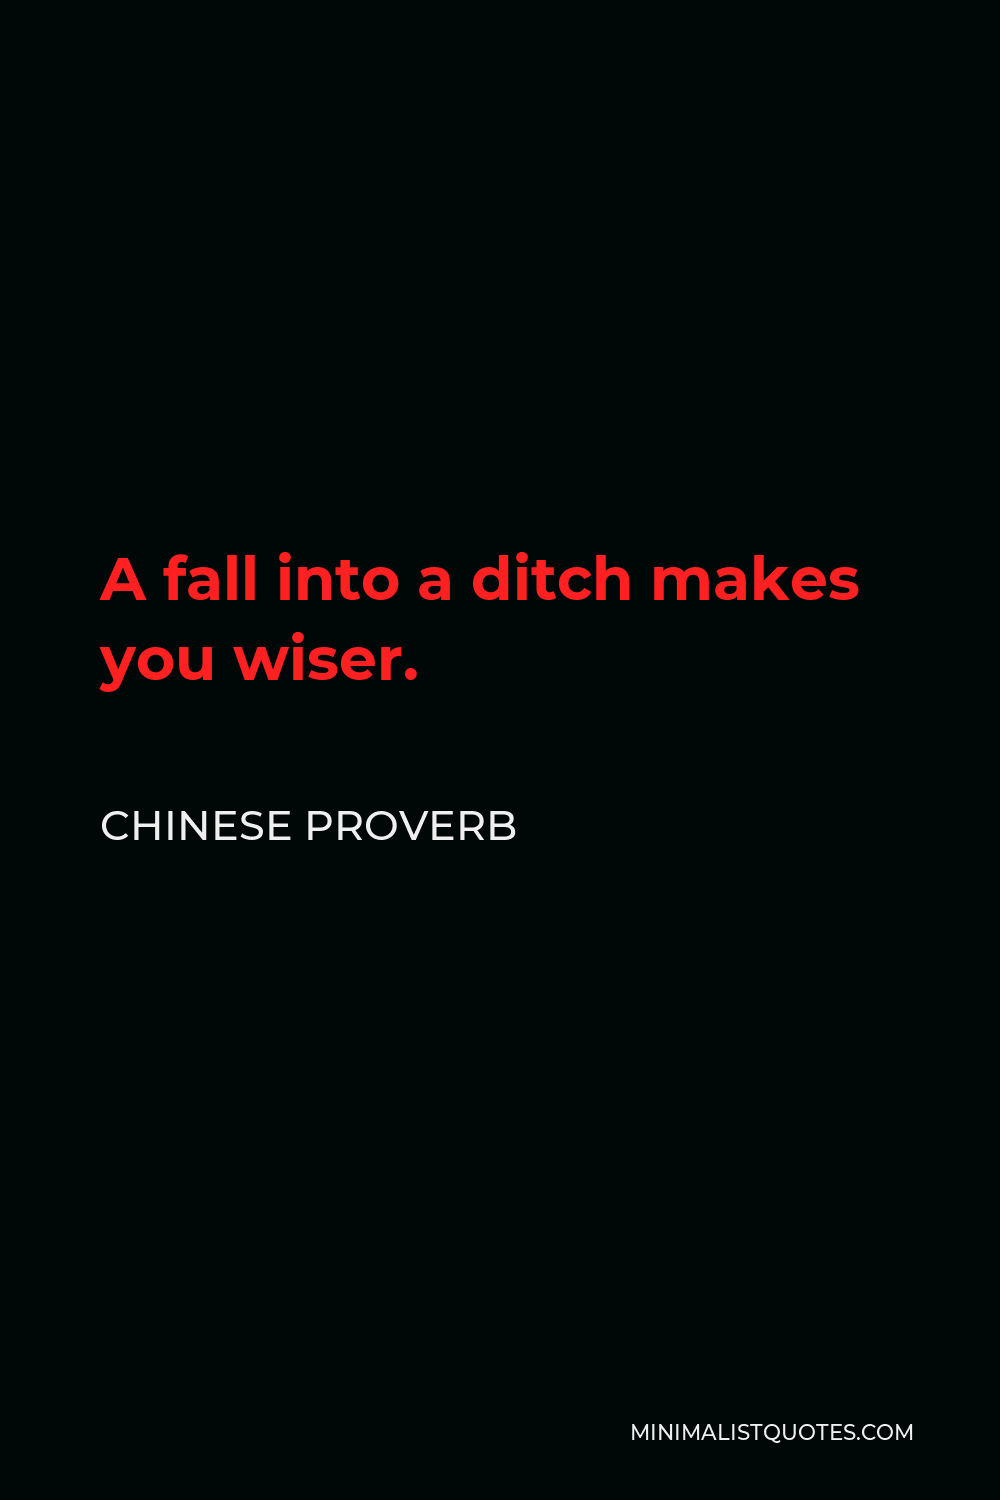 Chinese Proverb Quote - A fall into a ditch makes you wiser.